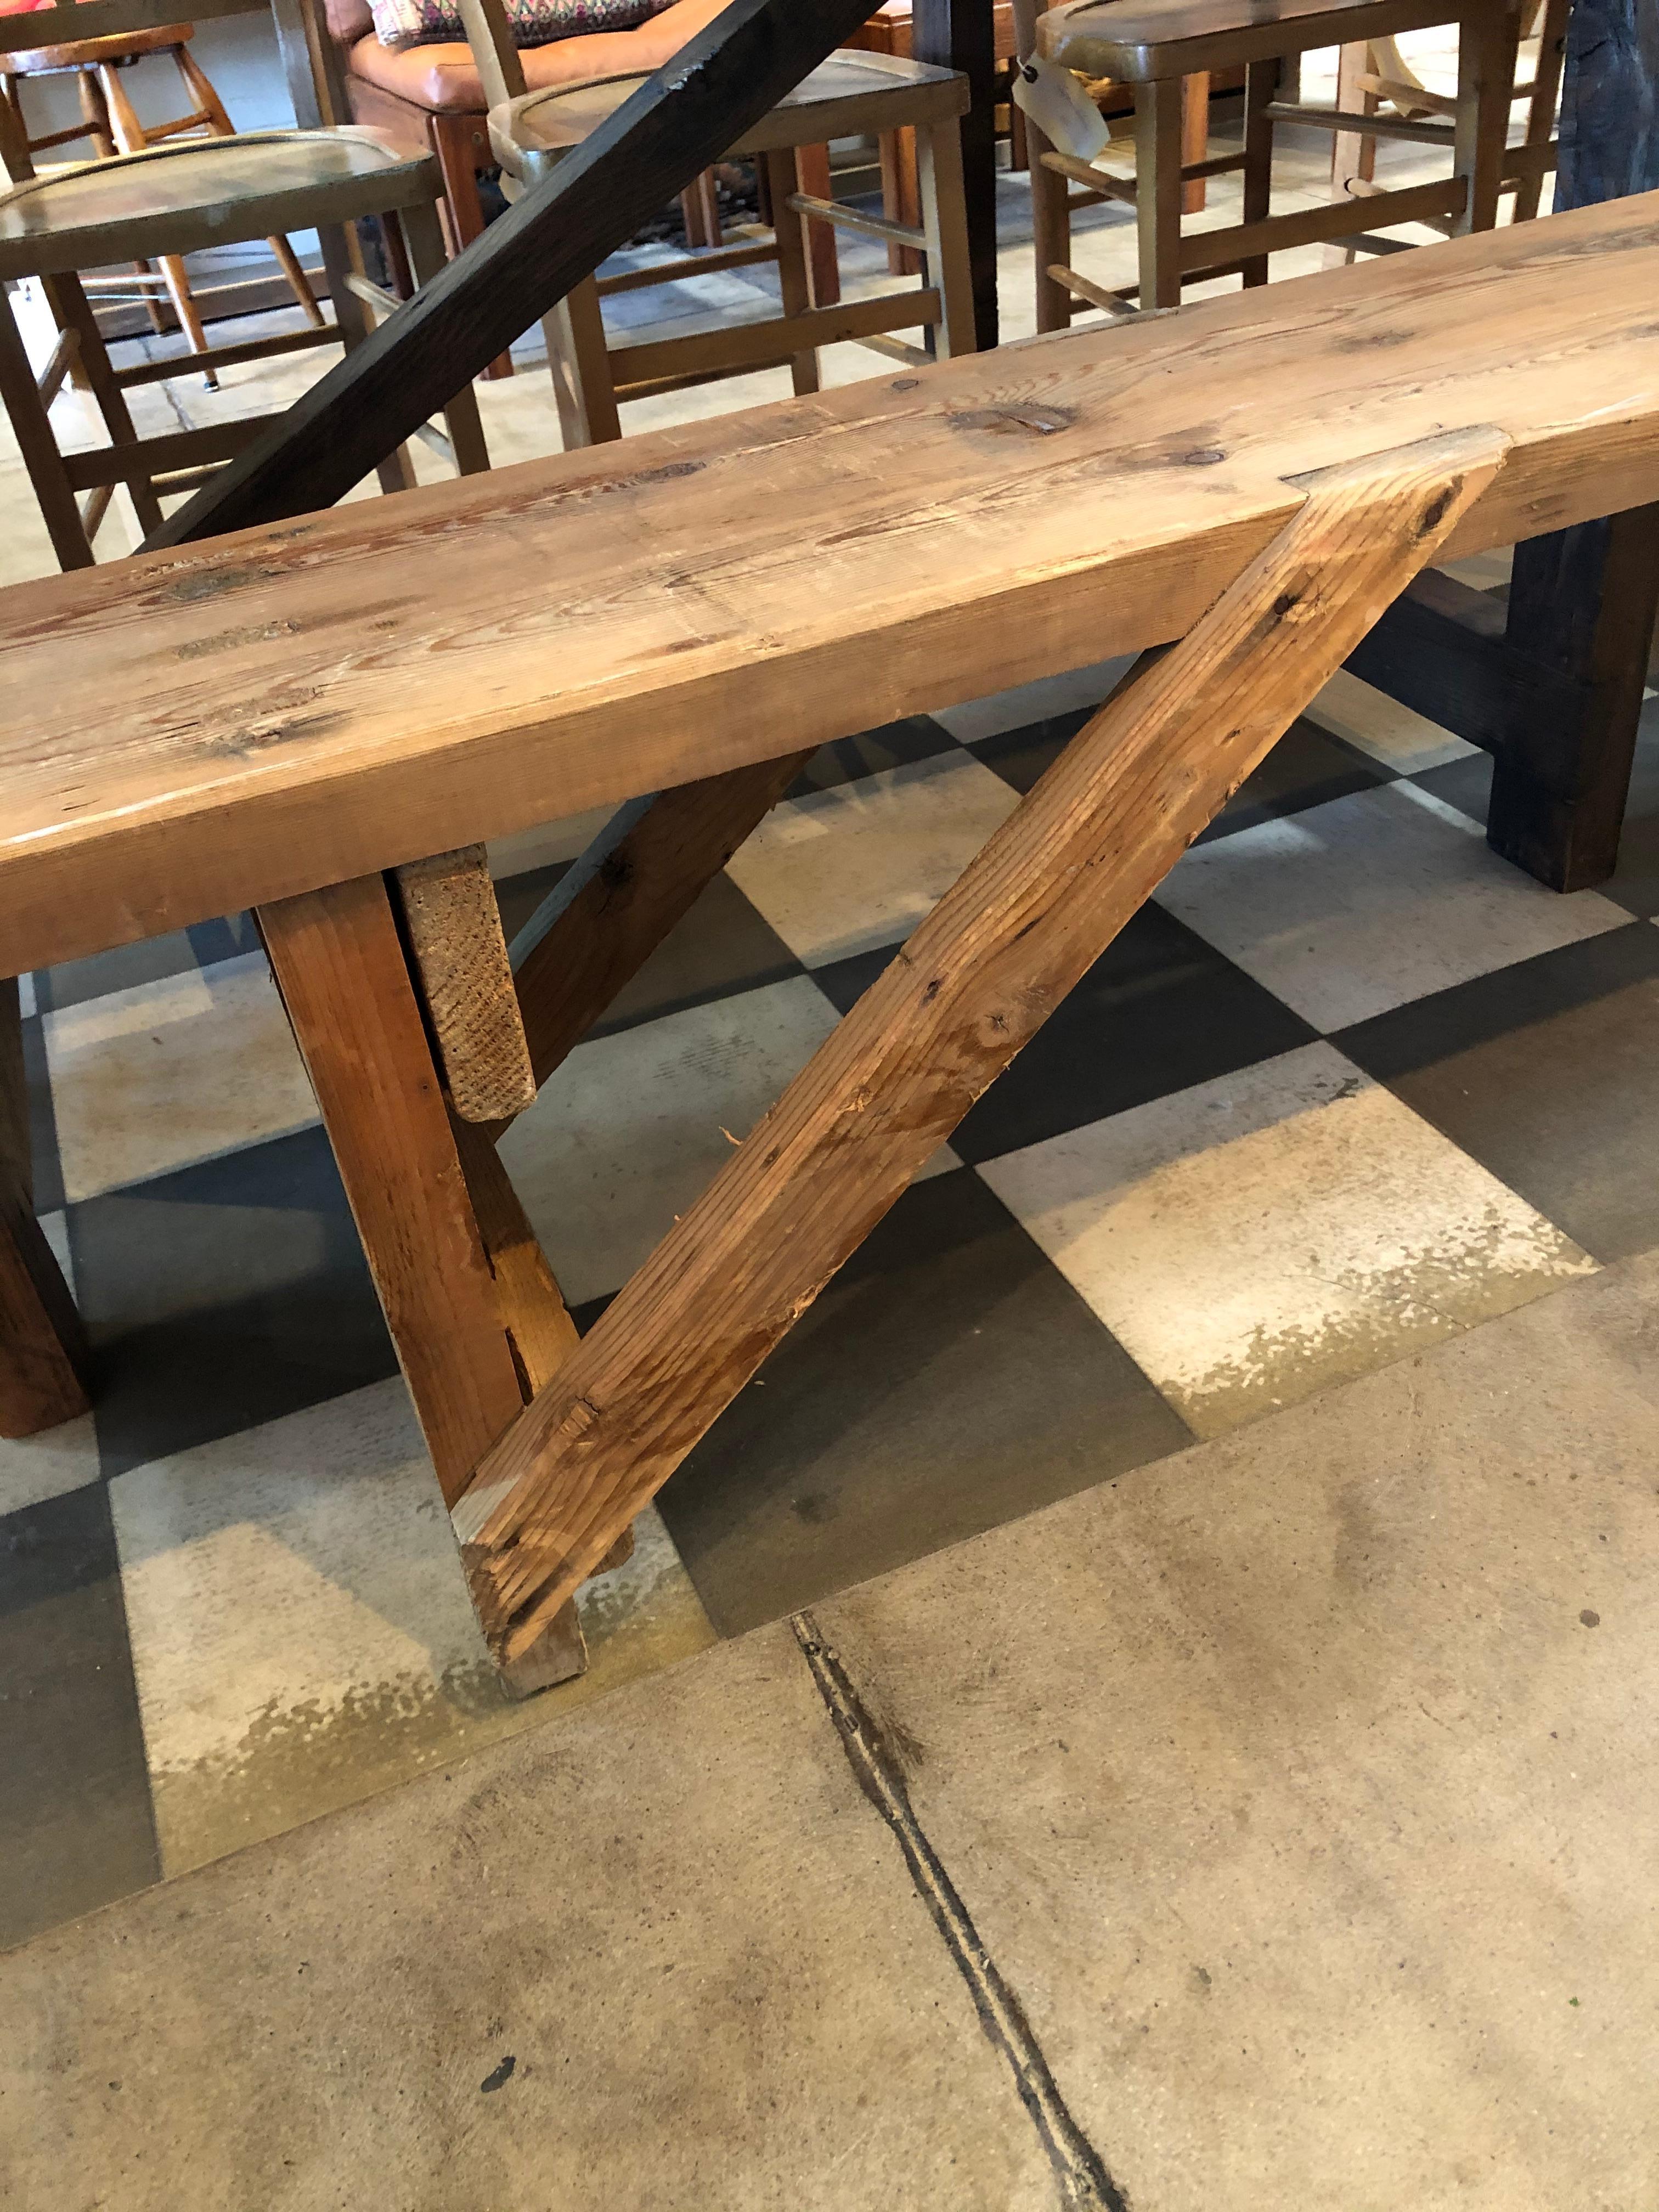 Vintage European bench that would be styled nicely with a farmhouse table, against wall in an entry way, garden space and so on! Wood is a natural color showing the natural grain in the planks.